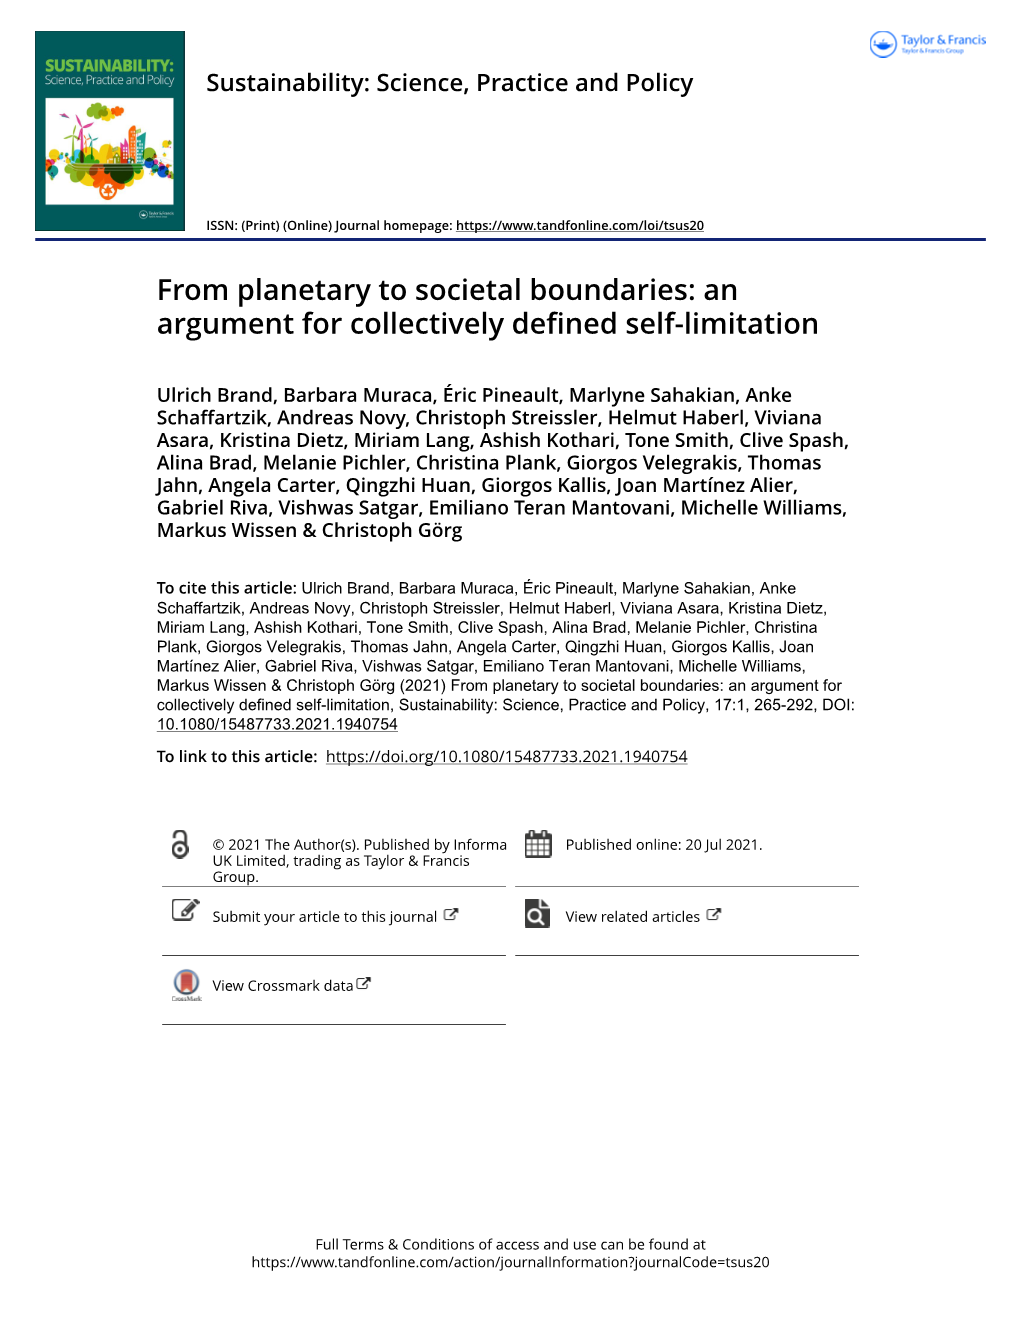 From Planetary to Societal Boundaries: an Argument for Collectively Defined Self-Limitation